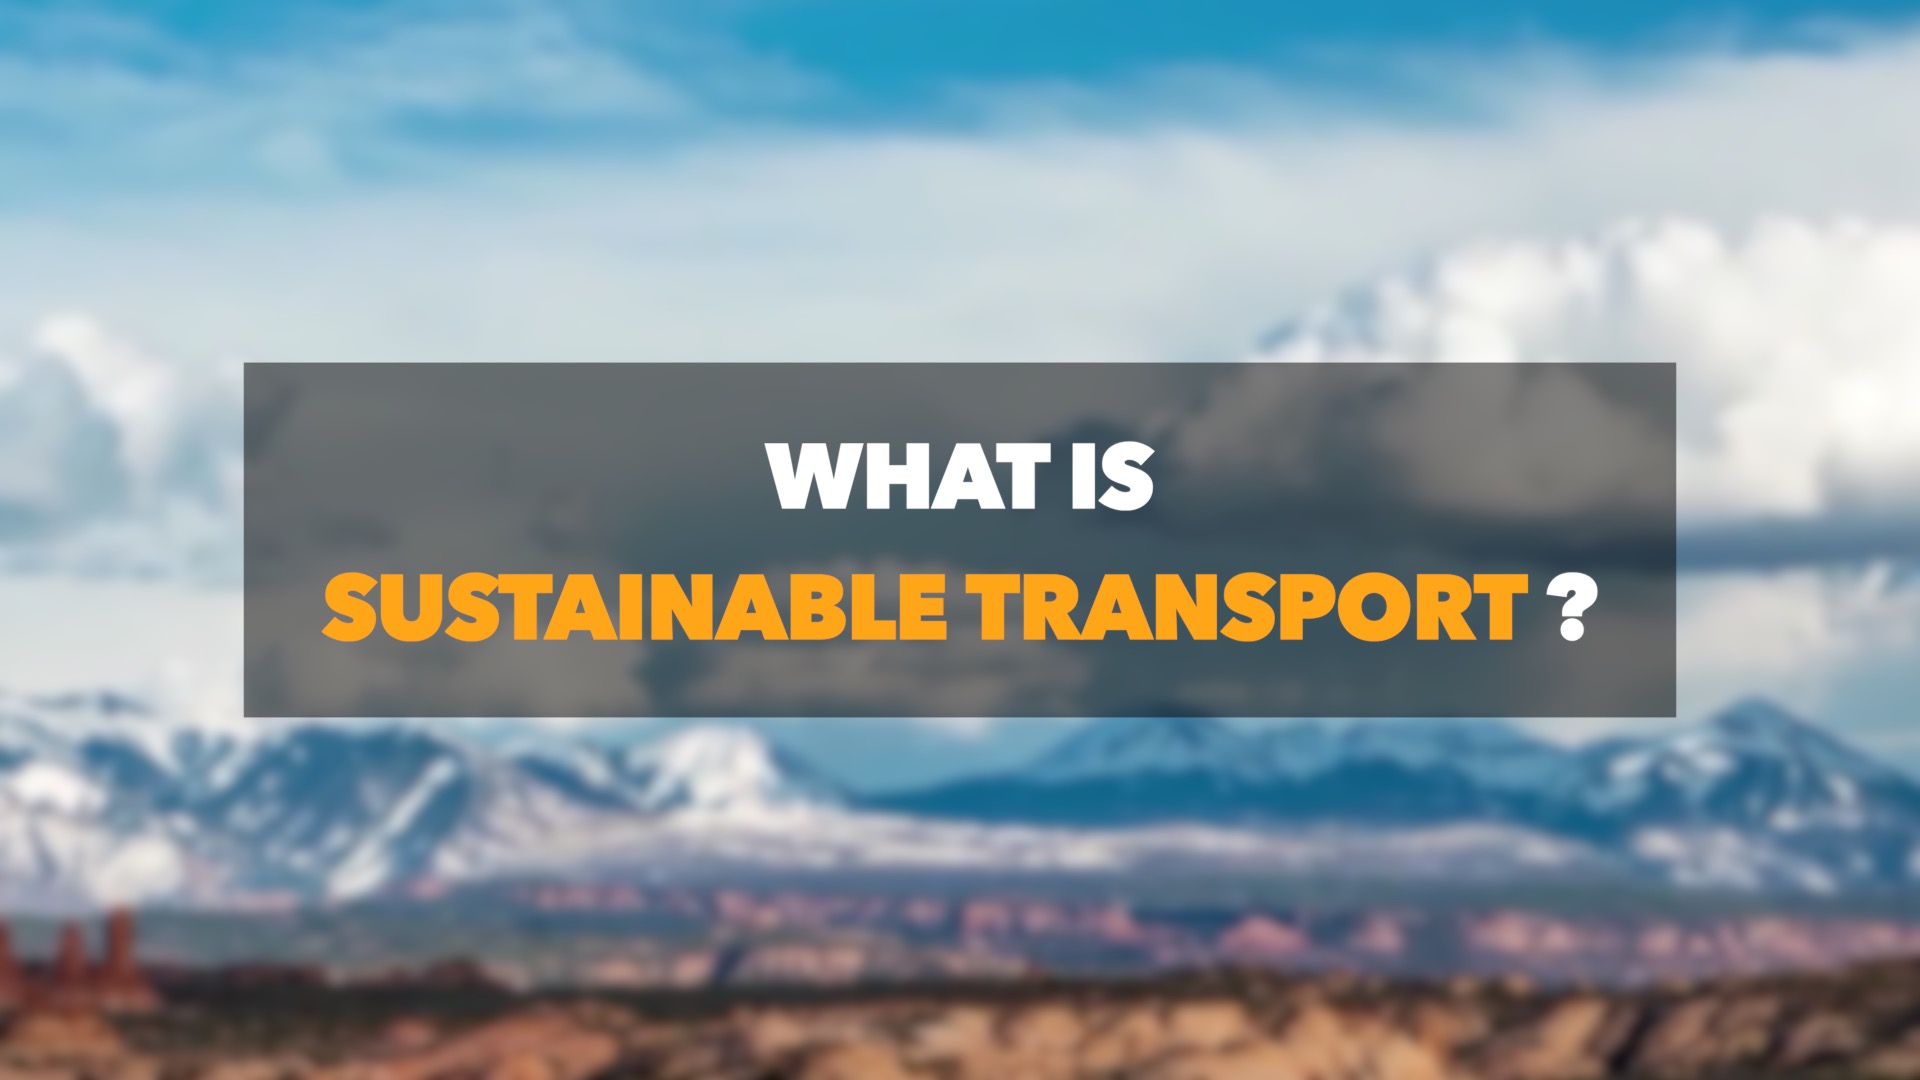 GLOBALink | Why is sustainable transport so important?